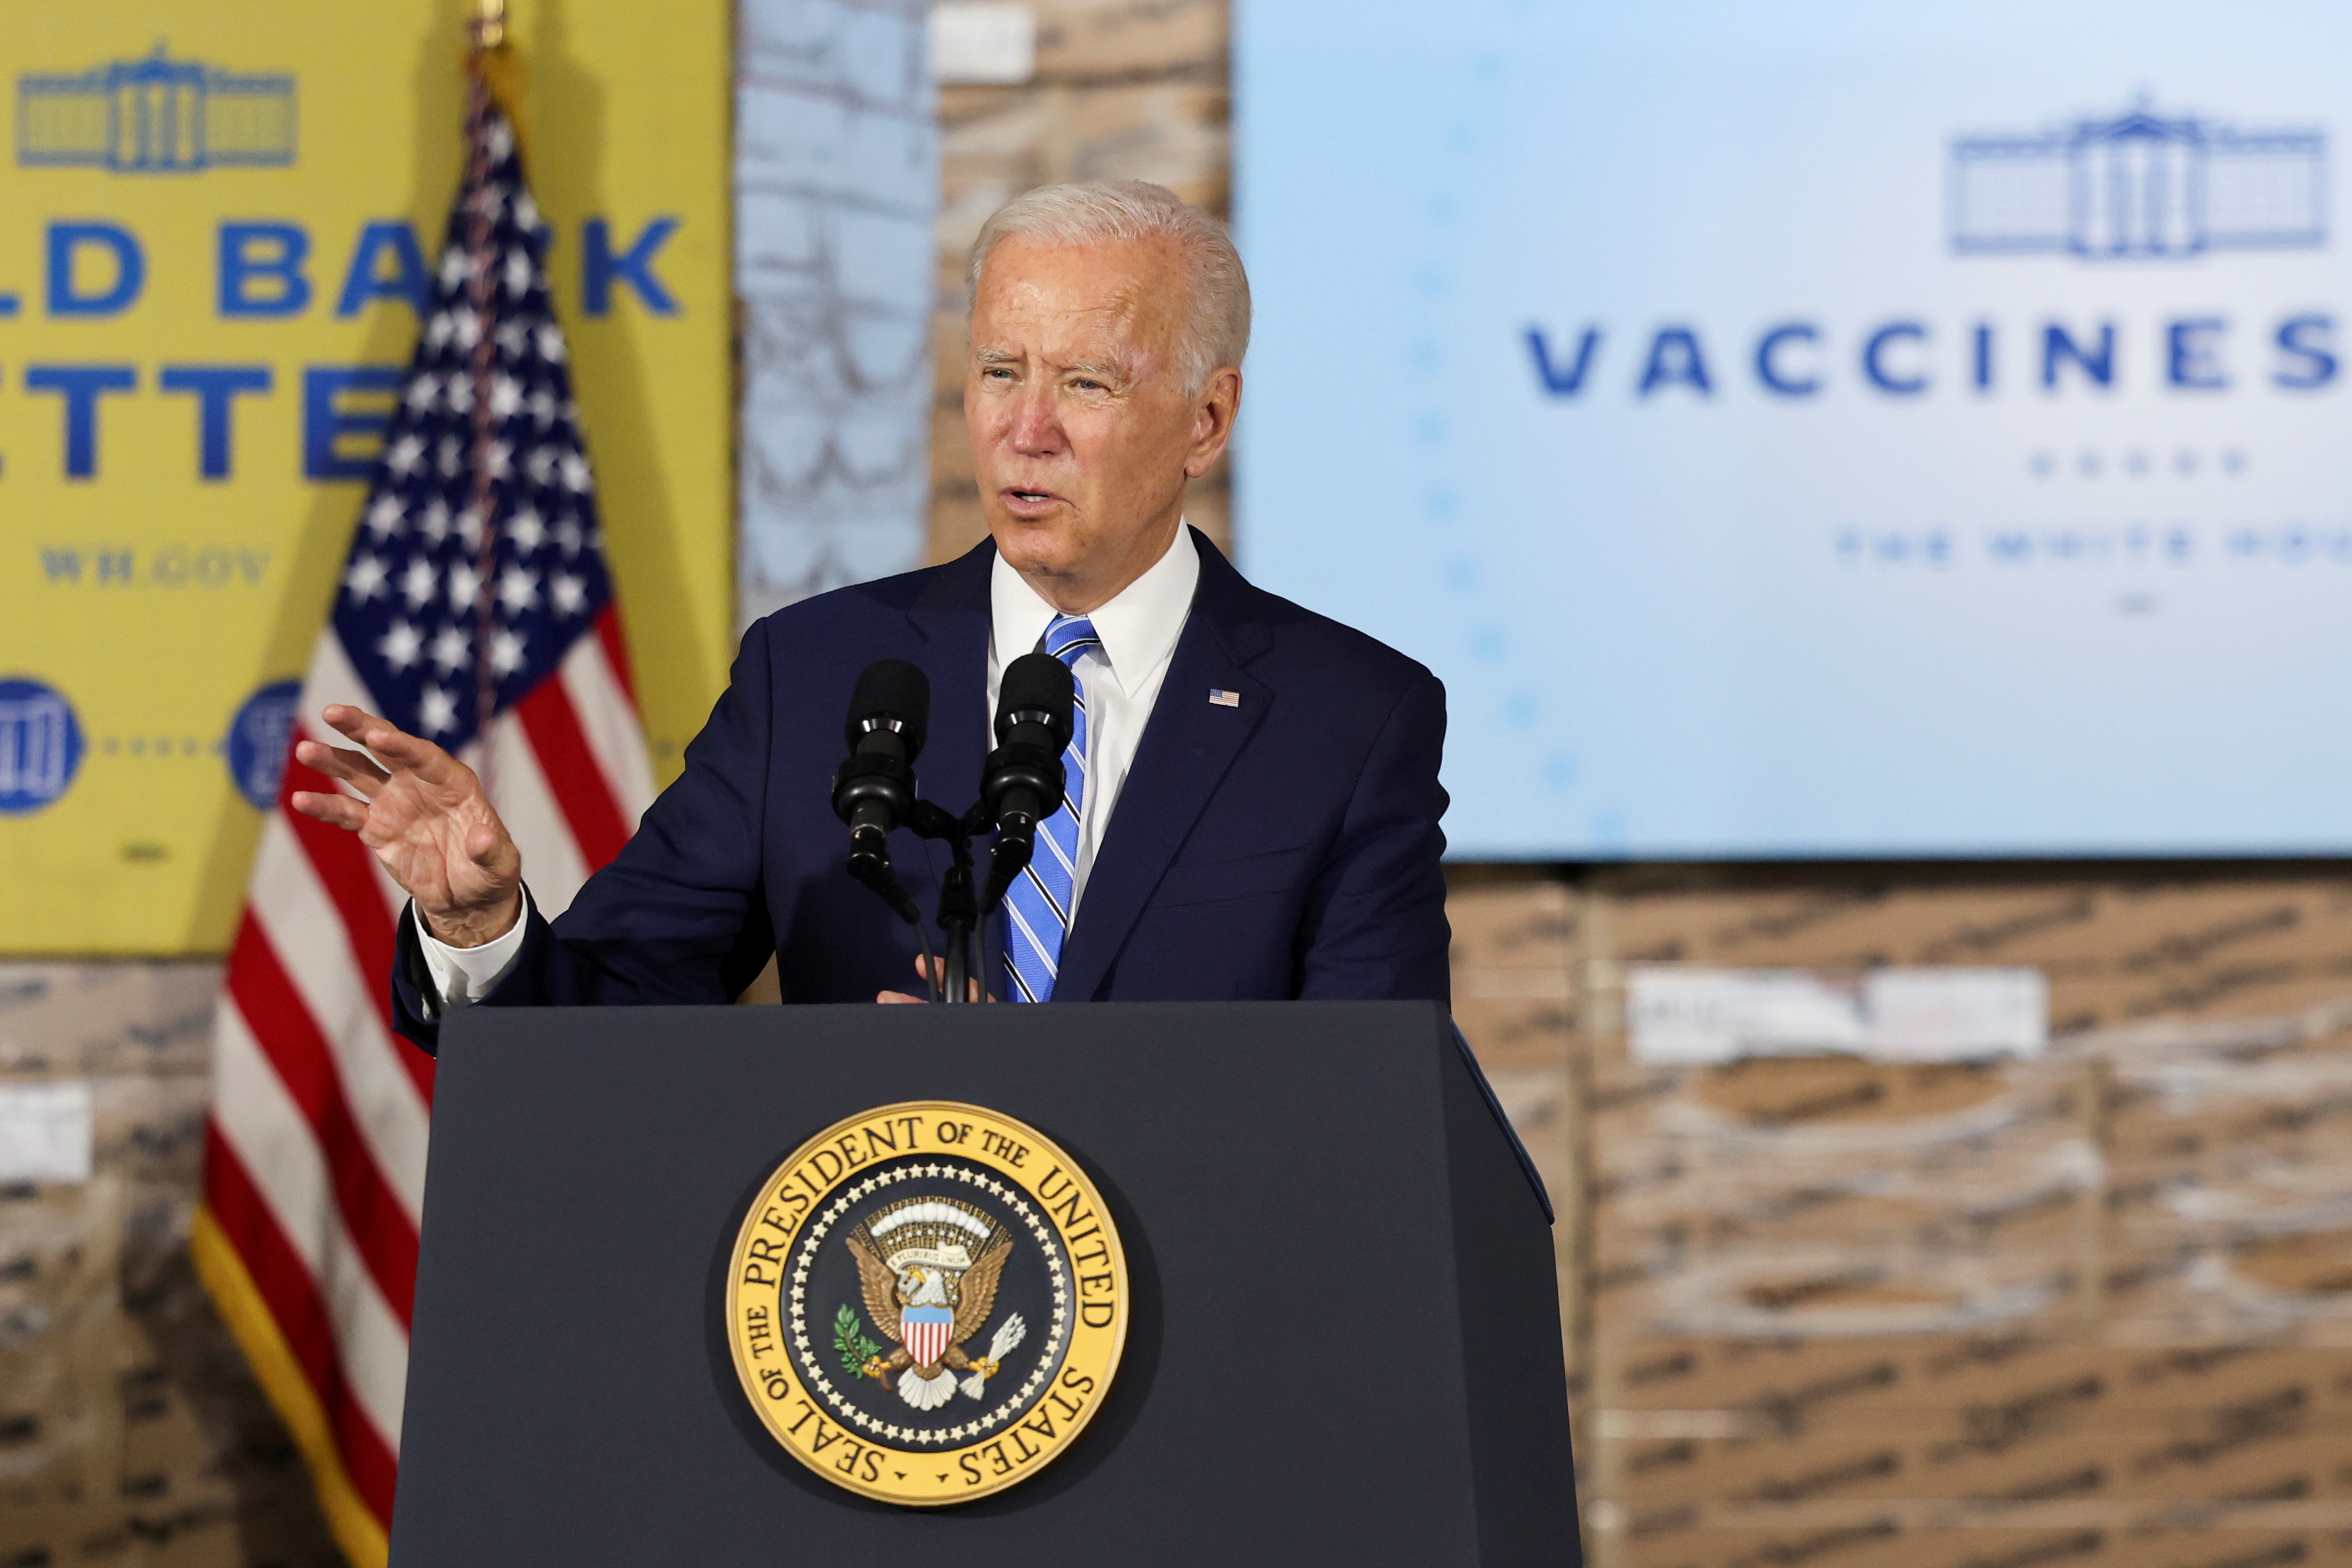 U.S. President Joe Biden gestures as he delivers remarks on the importance of COVID-19 vaccine requirements, during a visit at a Clayco construction site, in Elk Grove Village, Illinois, U.S. October 7, 2021. REUTERS/Evelyn Hockstein